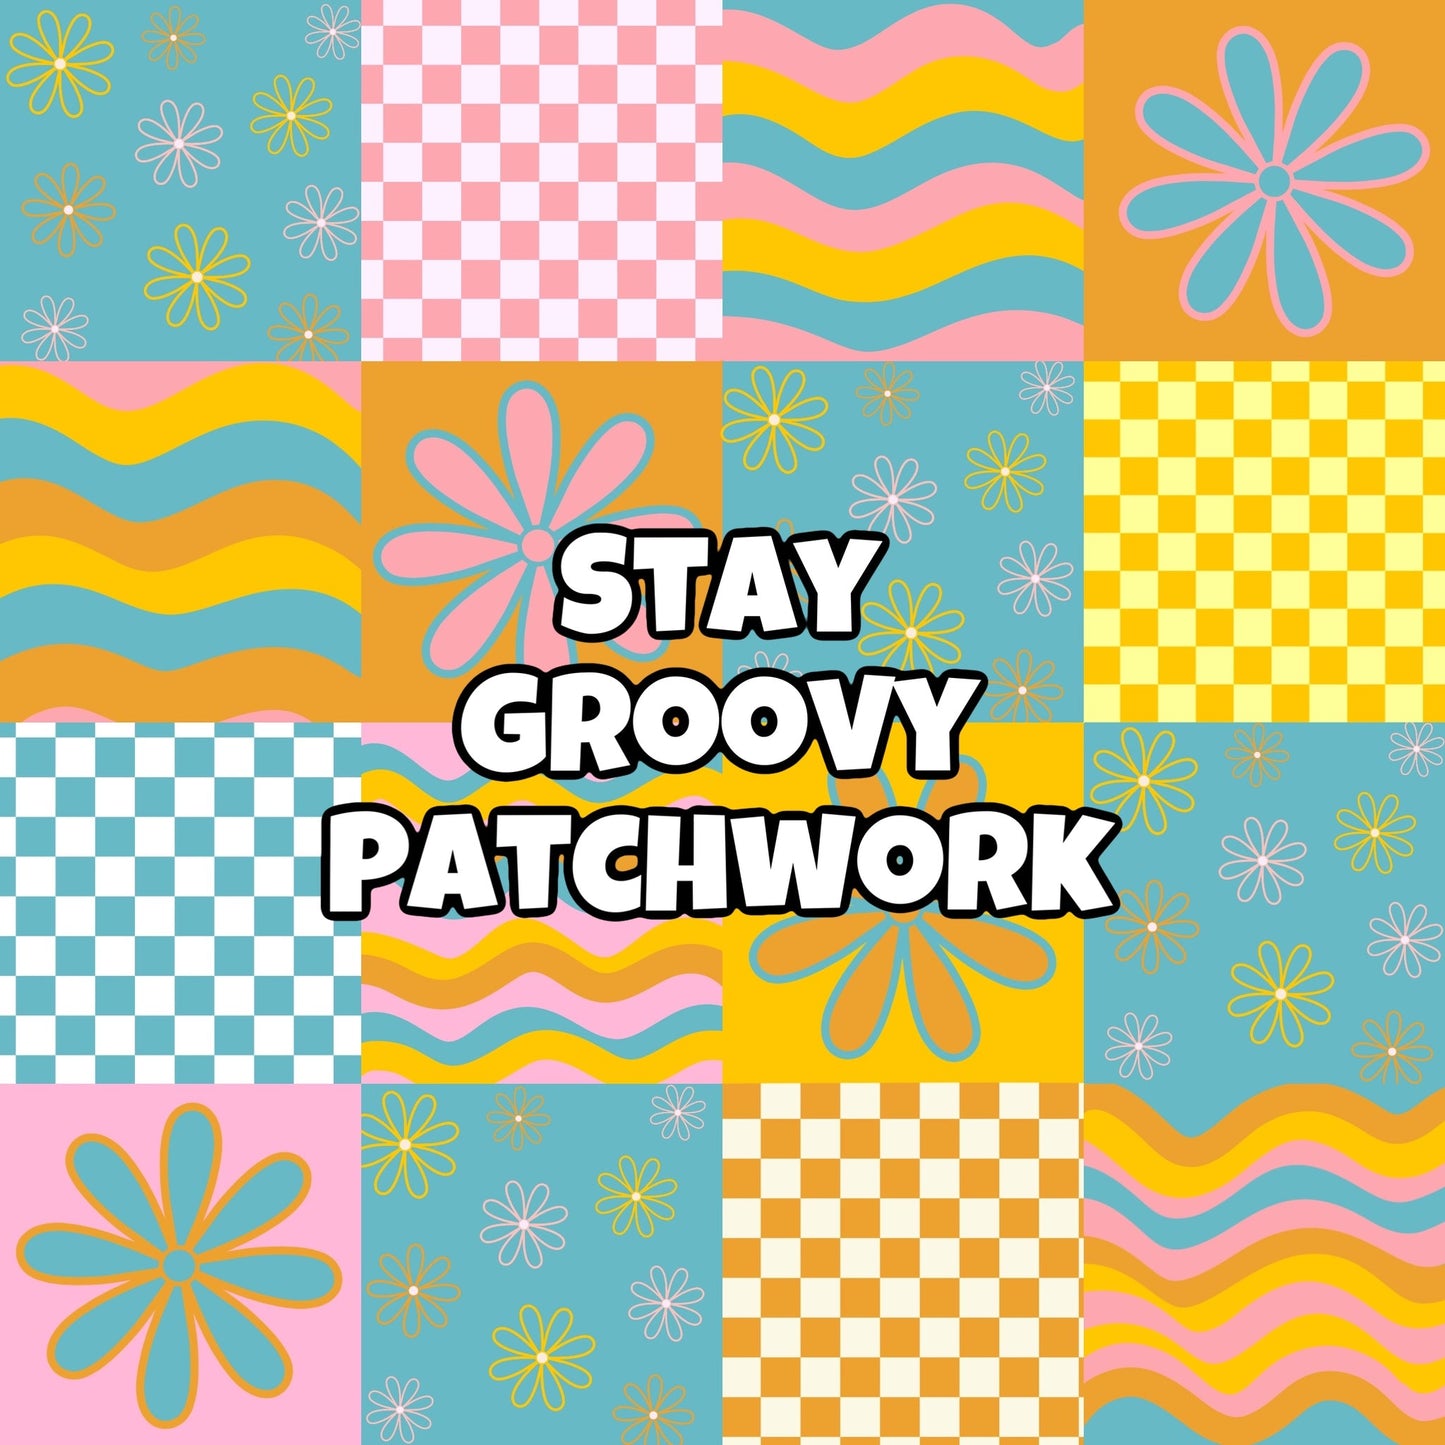 STAY GROOVY PATCHWORK